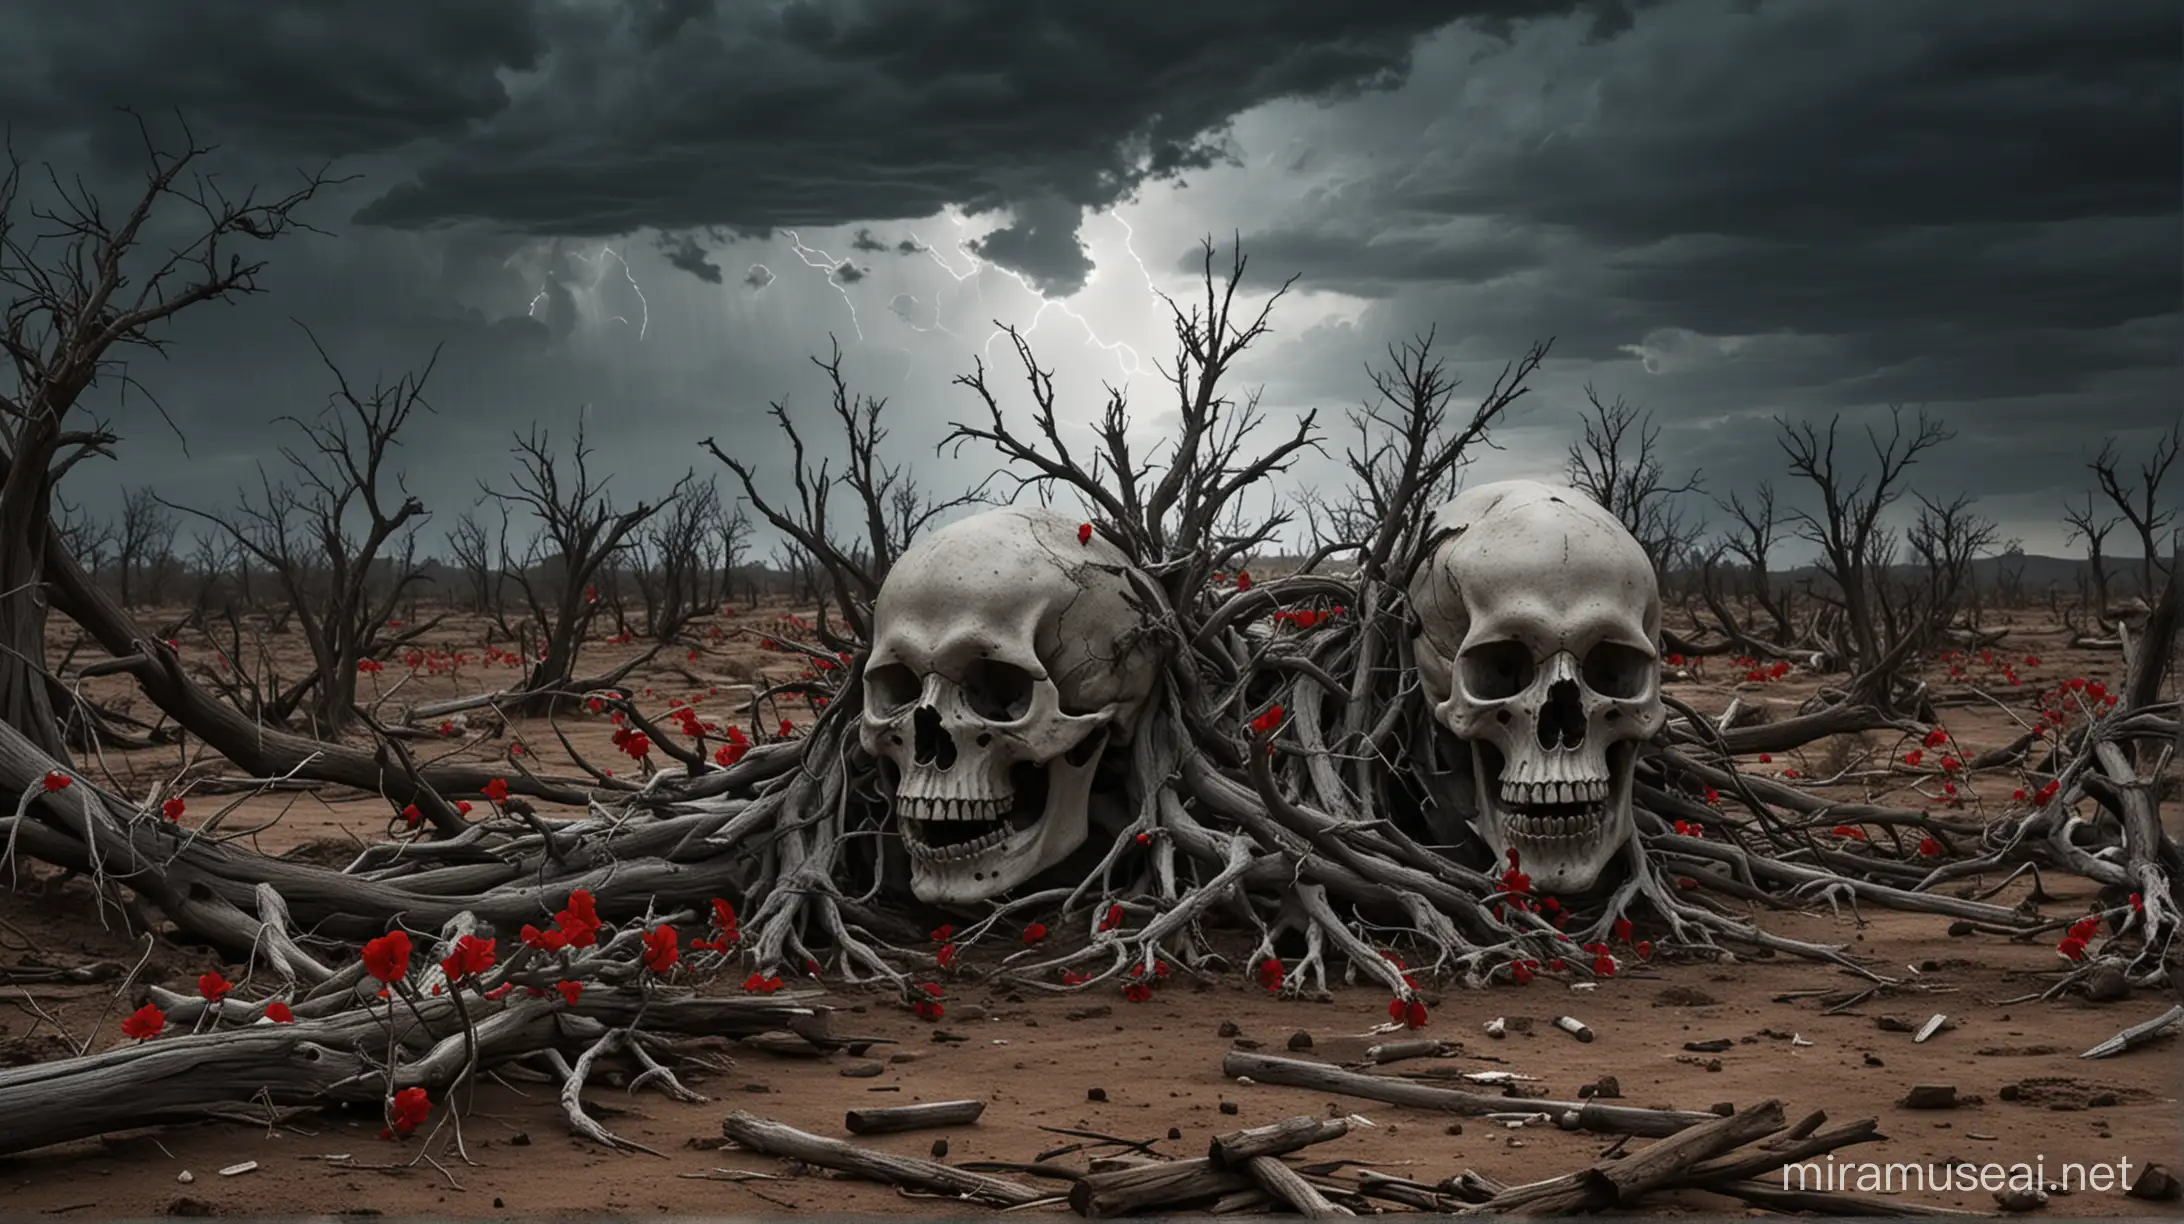 Two gaunt trees growing out of skulls lean against each other in a barren landscape. The hollows of the skulls form roaring faces that symbolize rage and battle.
The foliage of the trees growing out of the skulls are depicted as sharp blades, representing death and suffering.
The branches of the two trees surround a single, blood-red flower in the center, symbolizing hope and beauty in the midst of destruction.


A dark, stormy sky, saturated with lightning, reflects tension and destruction.
In the distance you can see the silhouette of the once proud city in ruins, a reminder of a bygone civilization.


Black and gray are the dominant colors to represent the sky and the barren landscape, symbolizing death and destruction.
Red accents on lightning bolts and flower, emphasizing struggle and hope.
Shades of white on the edges of the blades, emphasizing the cold reality of death.